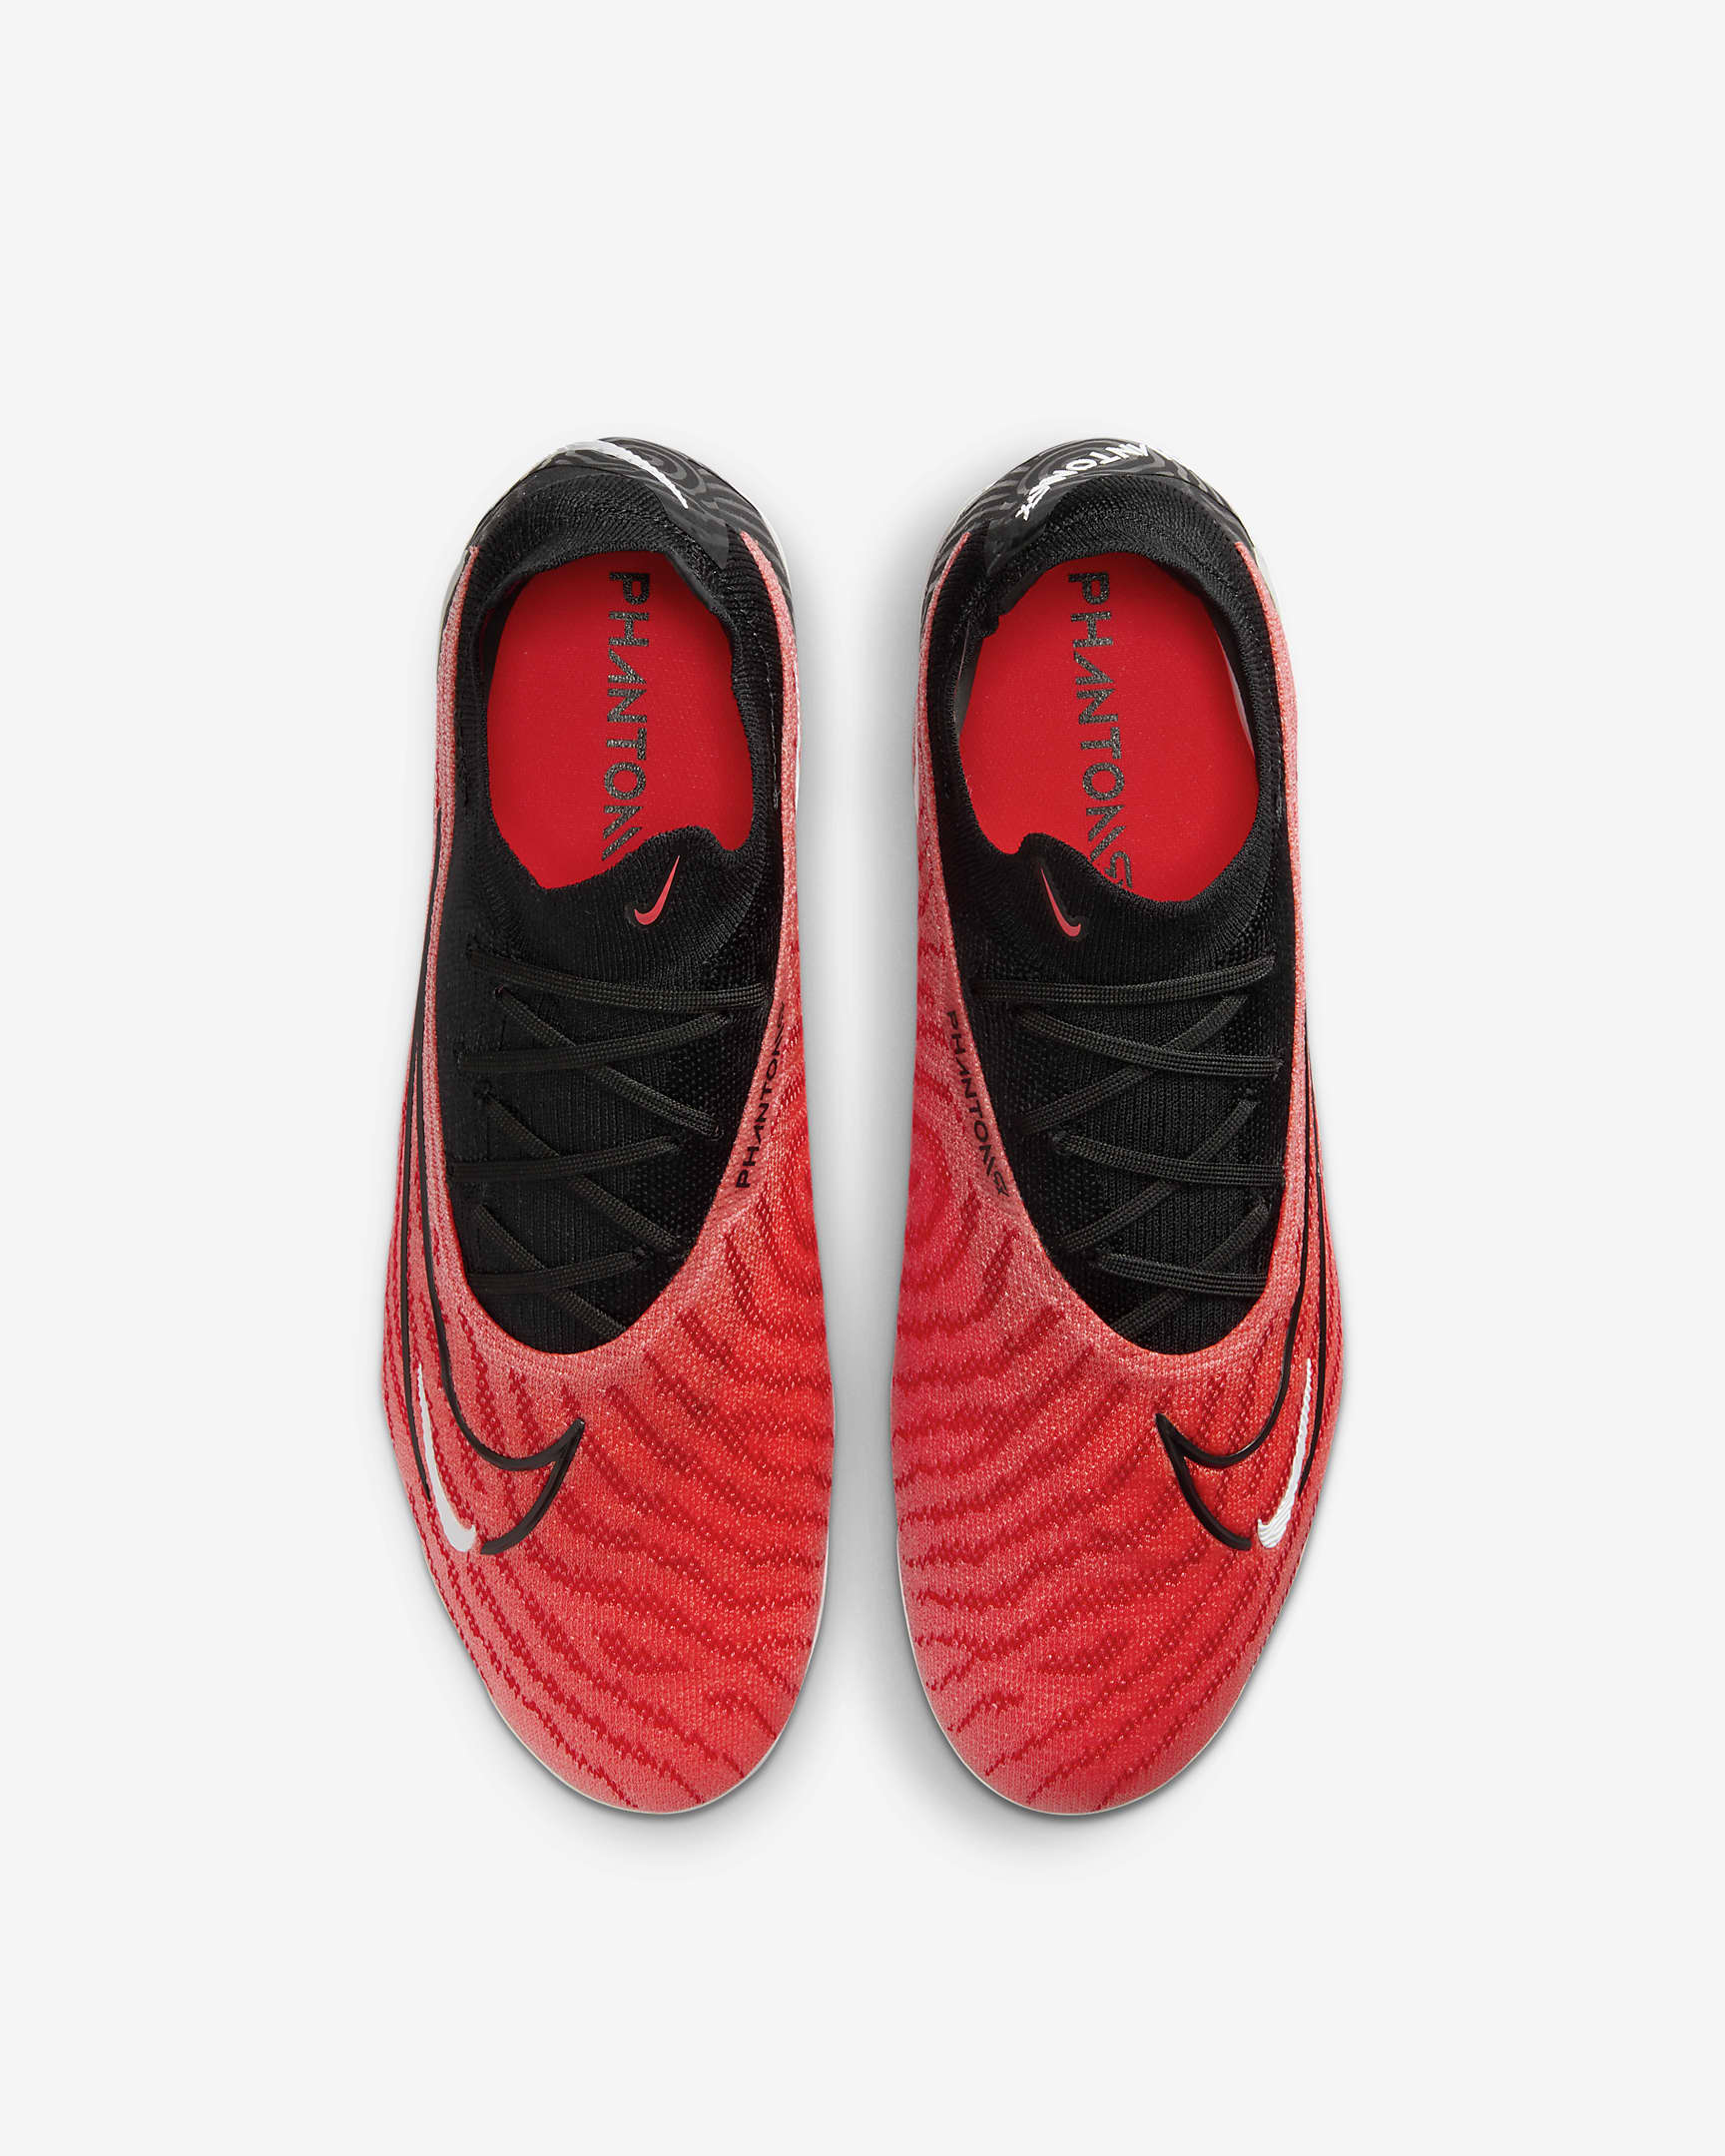 Nike Phantom GX Review REVEALED: Can These Cleats Make You a LEGEND on ...